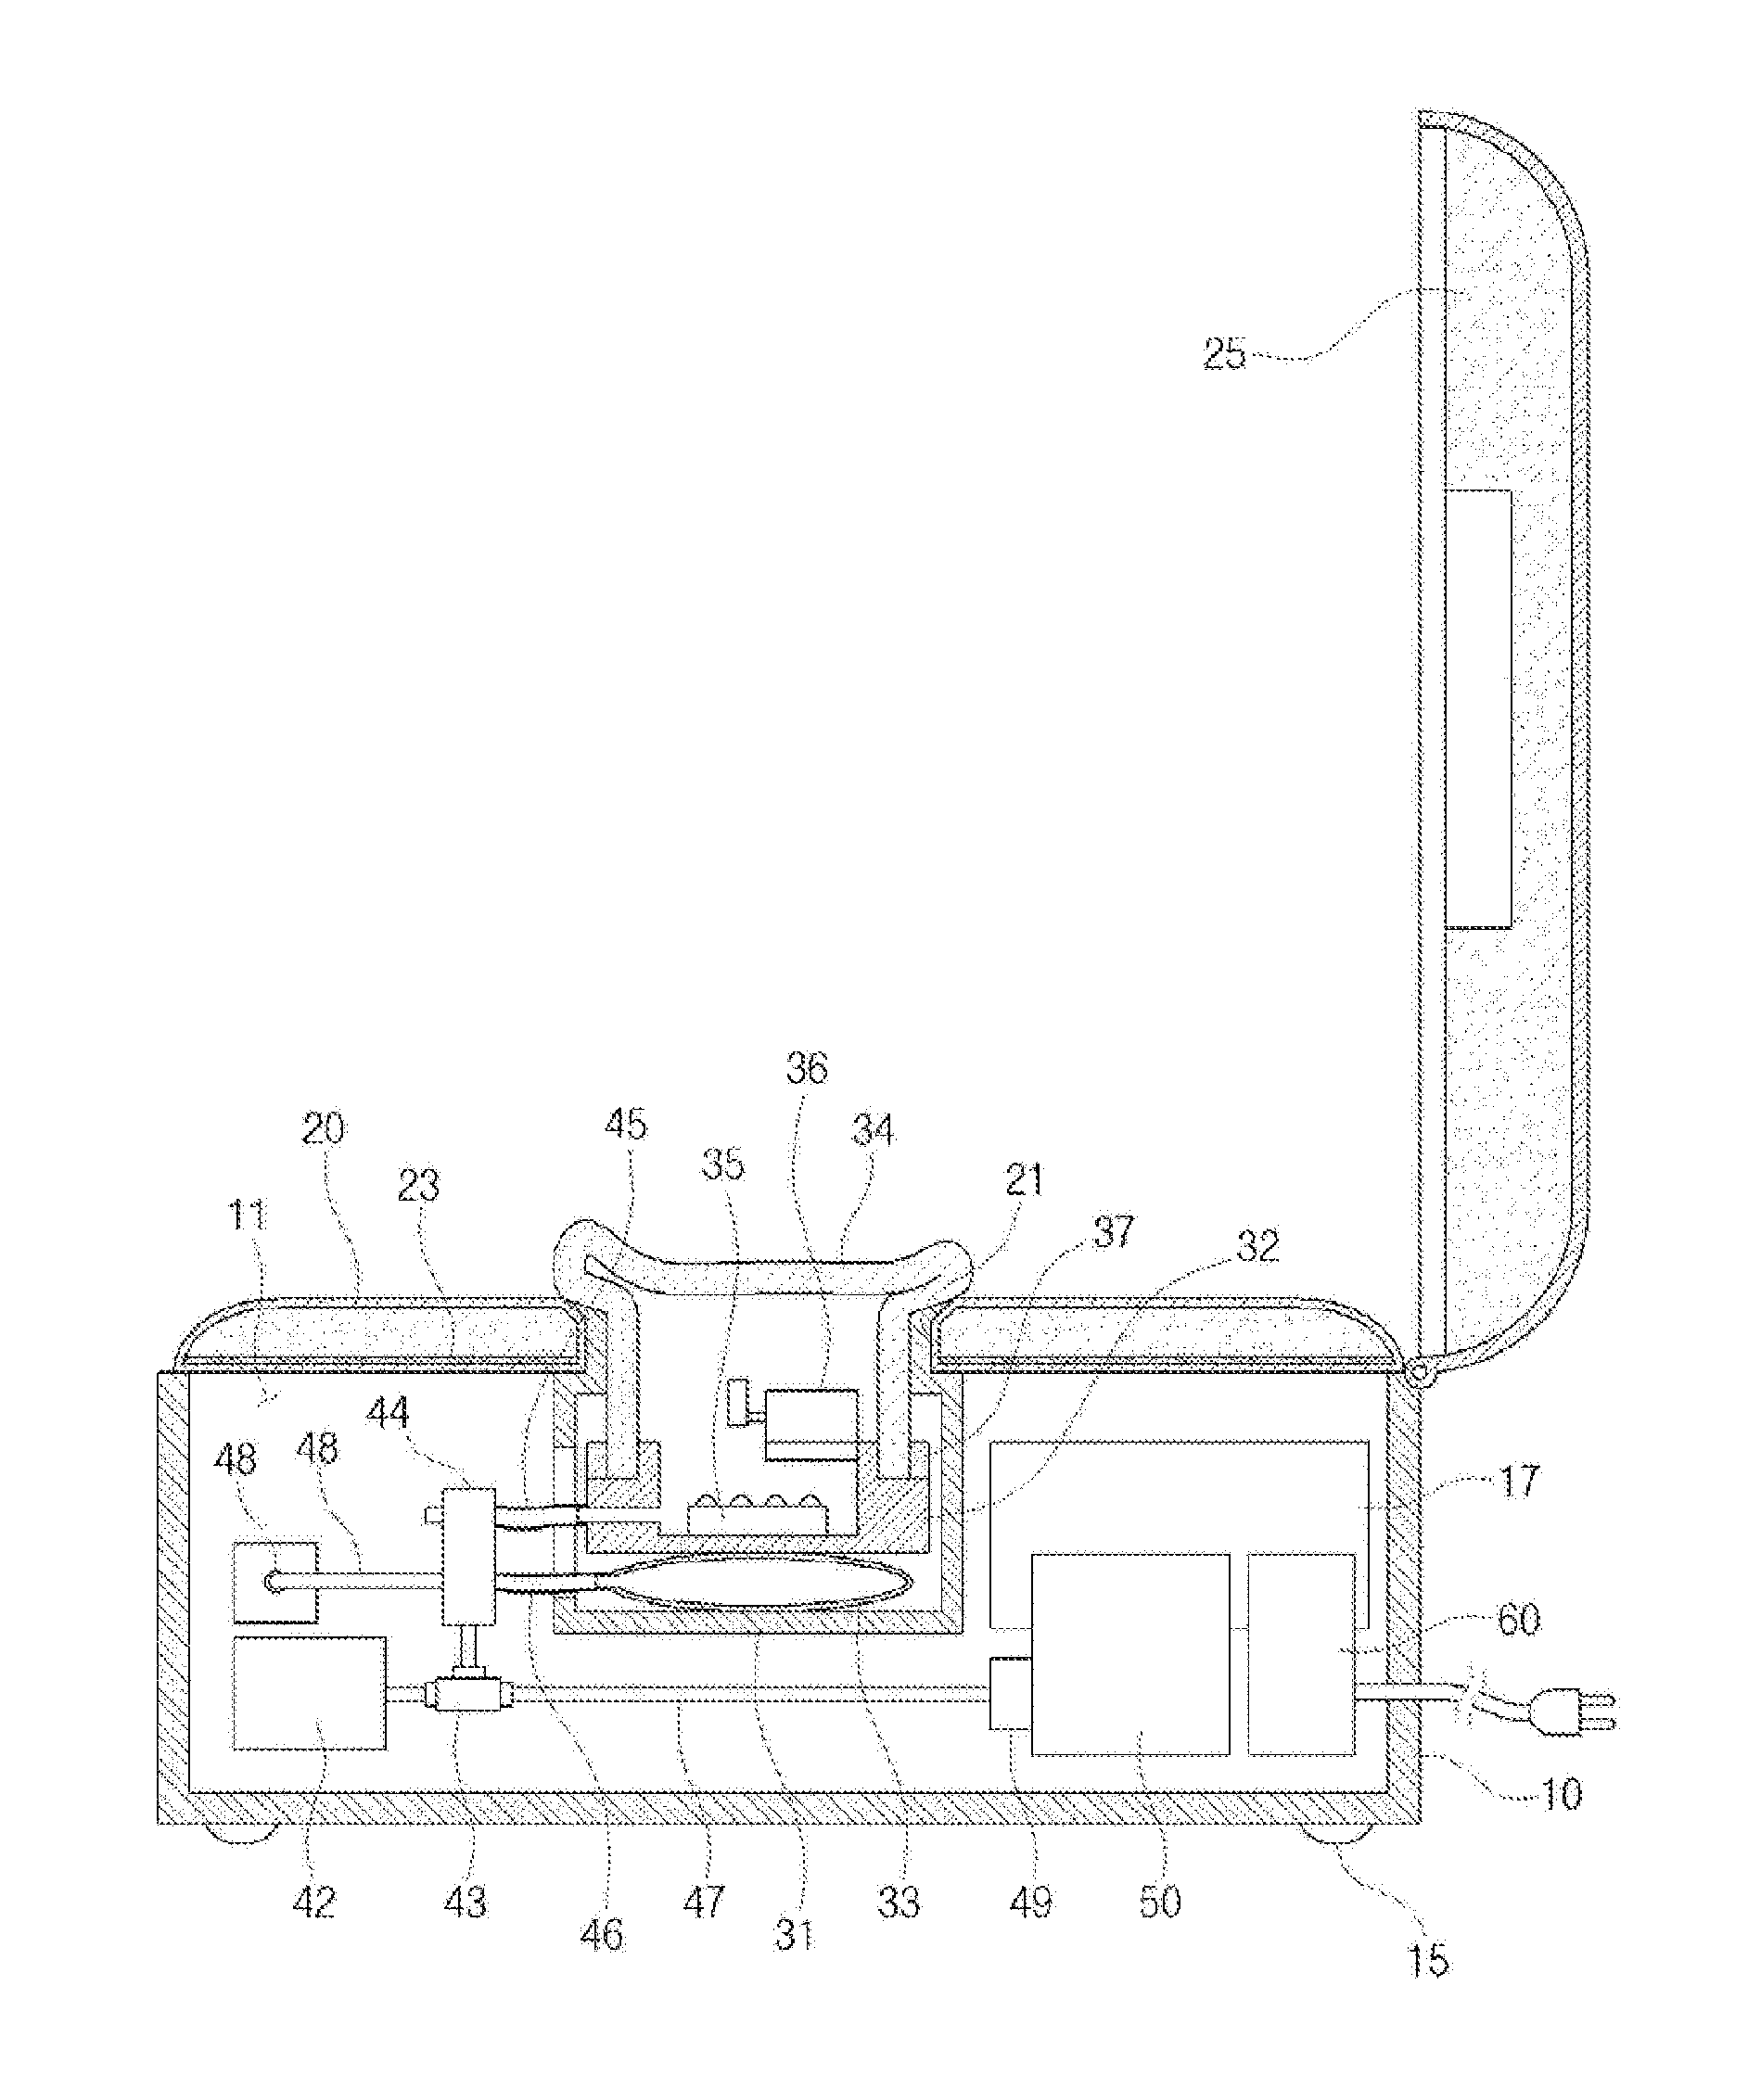 Seating apparatus for diagnosis and treatment of diagnosing and curing urinary incontinence, erectile dysfunction and defecation disorders